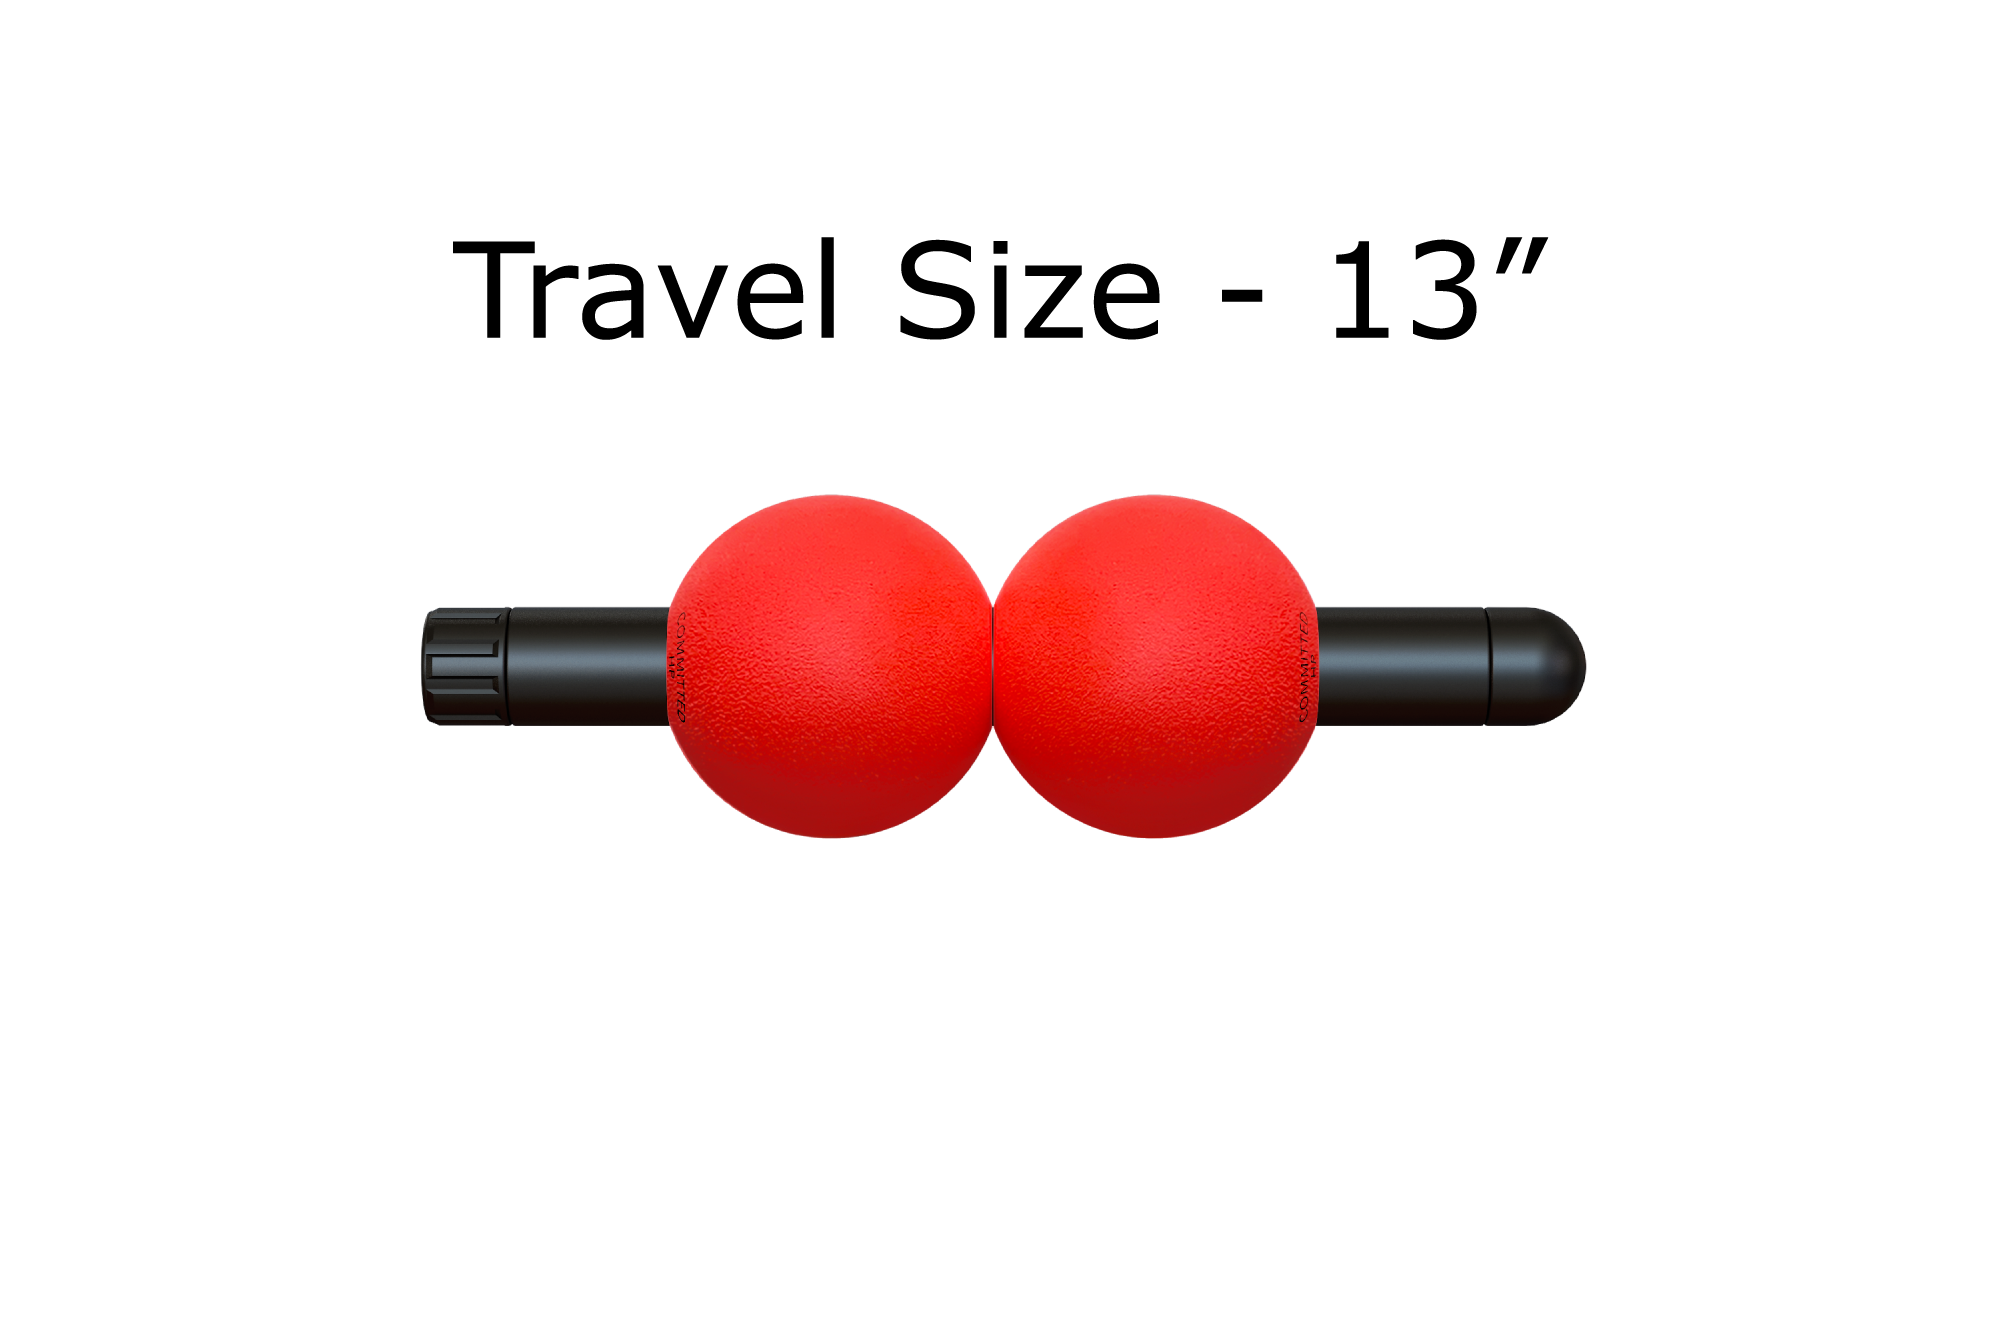 The Moball Roller Travel Size- Compact, dense, and effective recovery tool for tension release and improved recovery.